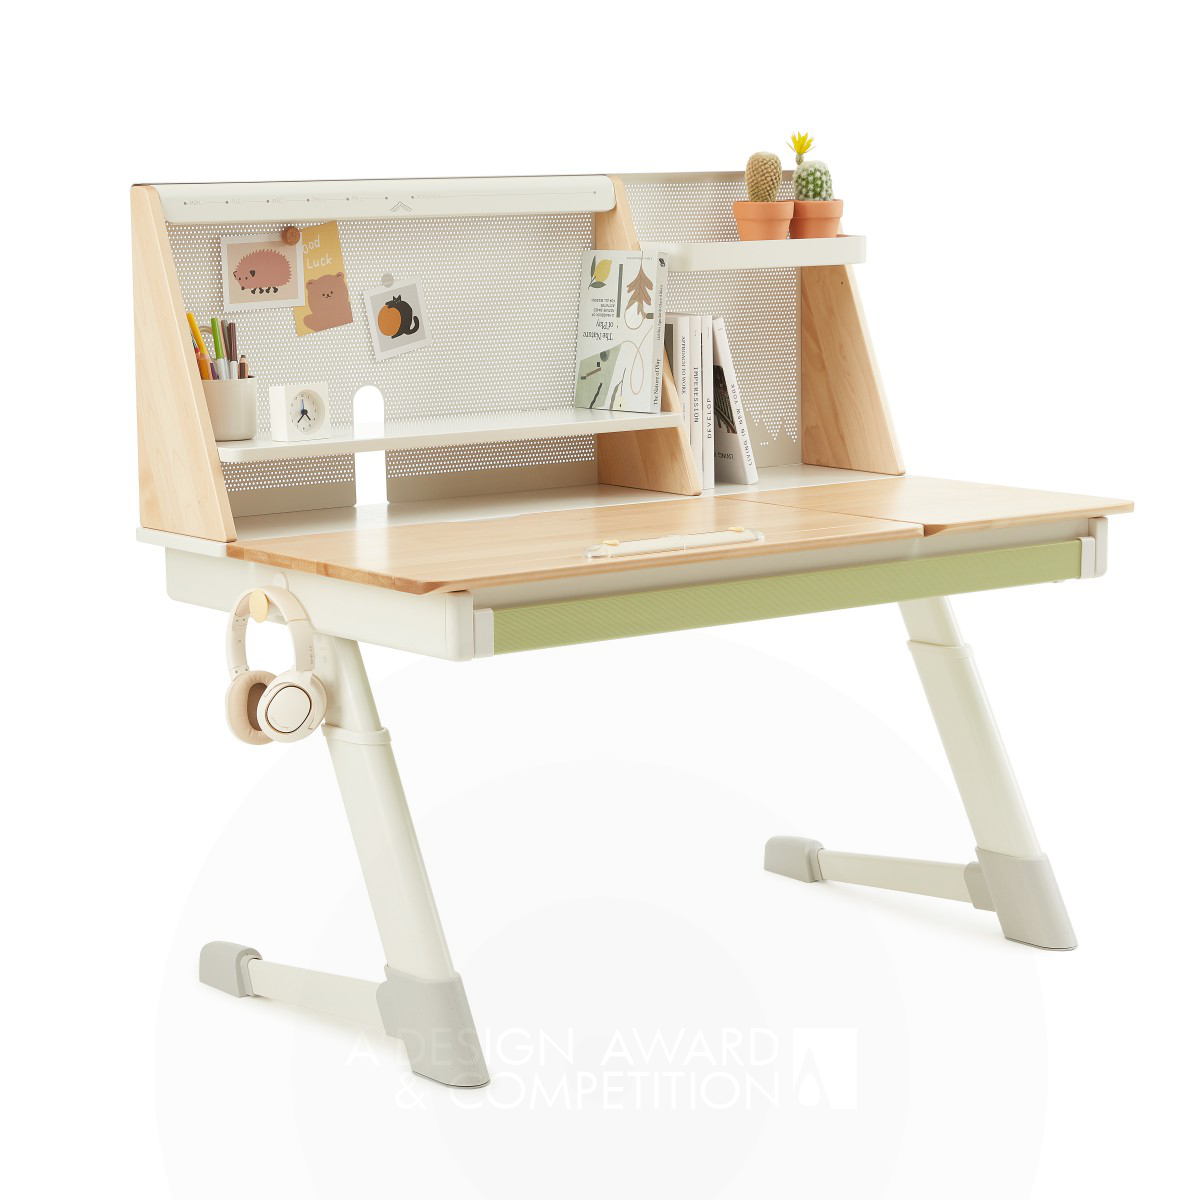 PanYan Fei wins Silver at the prestigious A' Baby, Kids and Children's Products Design Award with Explorer Multifunctional Study Desk.